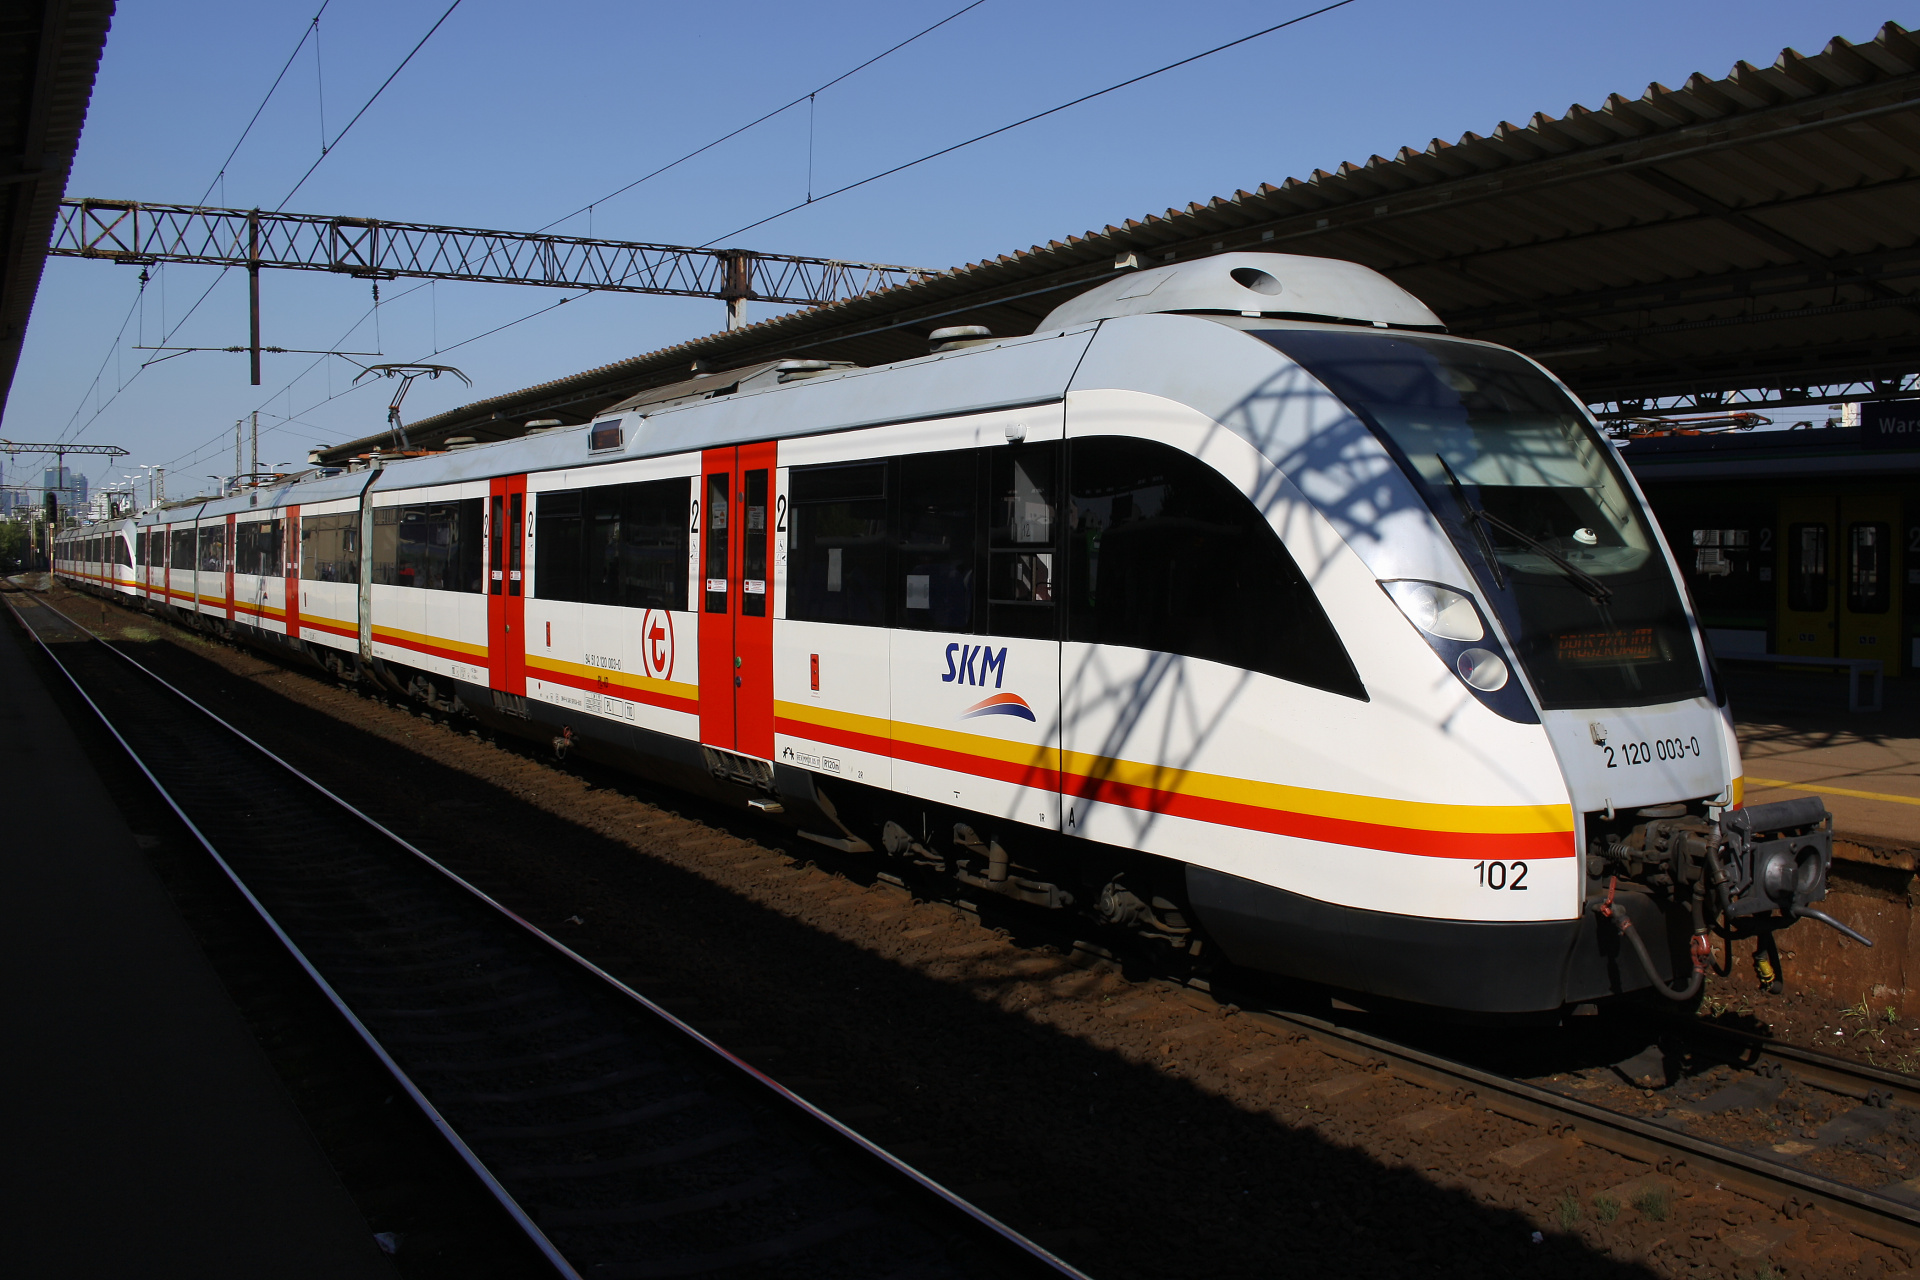 Newag 14WE-02 (partial SKM livery) (Vehicles » Trains and Locomotives)